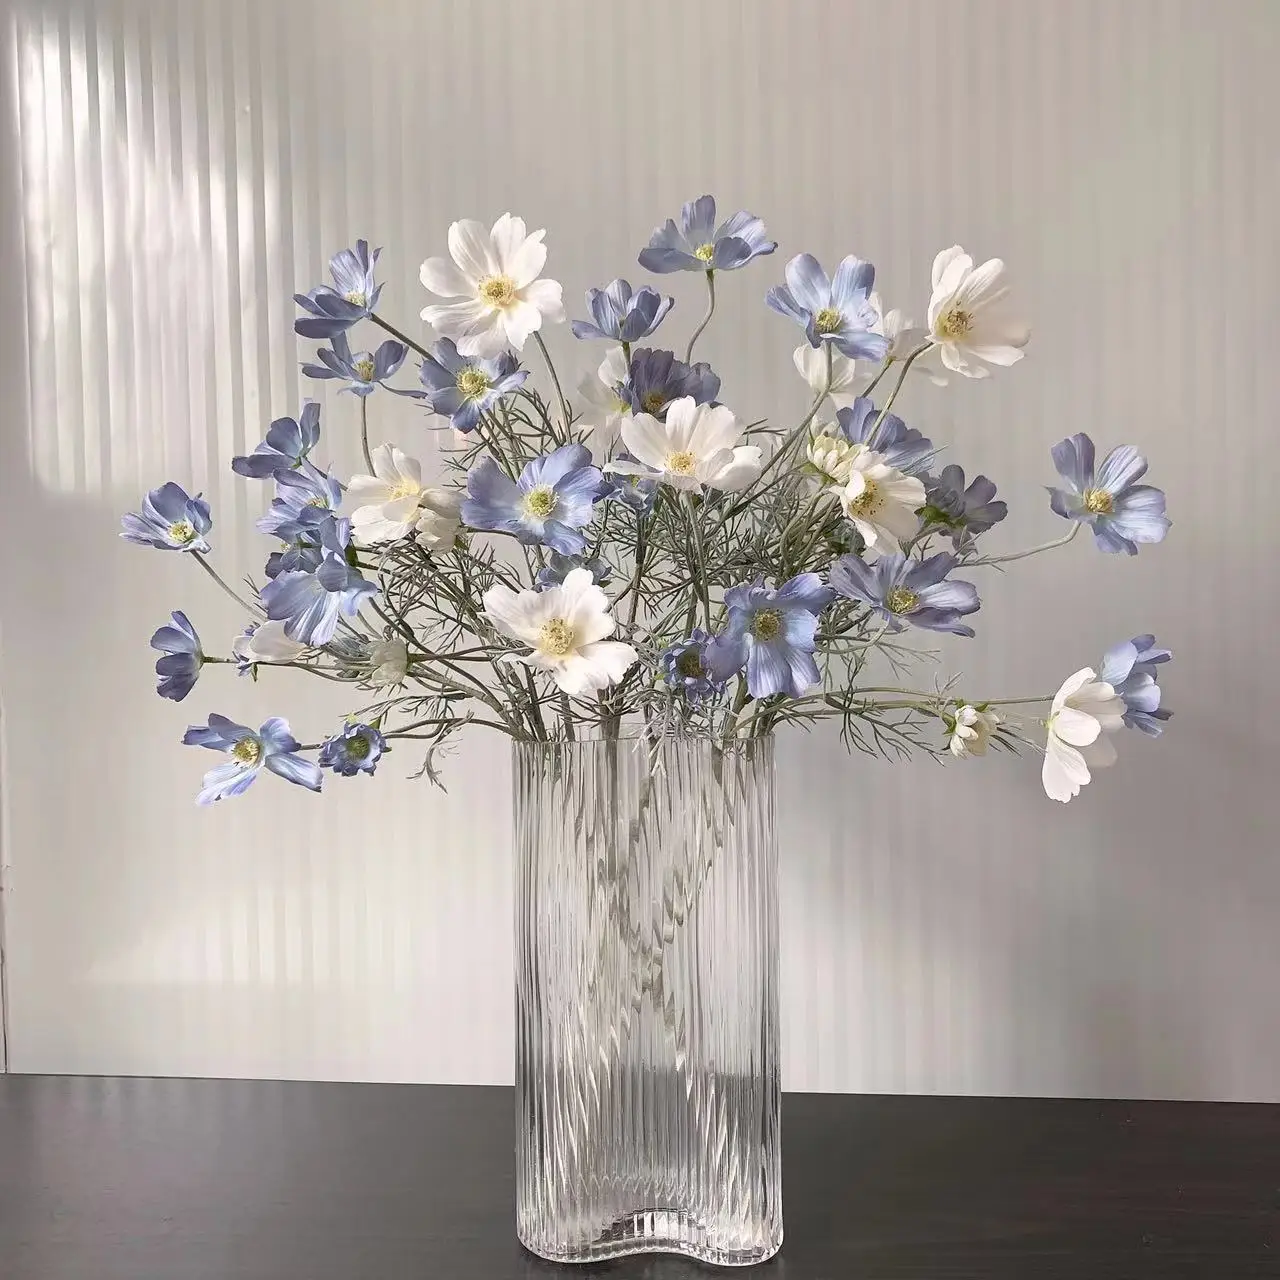 Chamomiles Silk Artificial Flower 60cm Daisy White Fake Flowers Room Wedding Home Table Decorations Party Diy Bouquet Gifts 1PCs